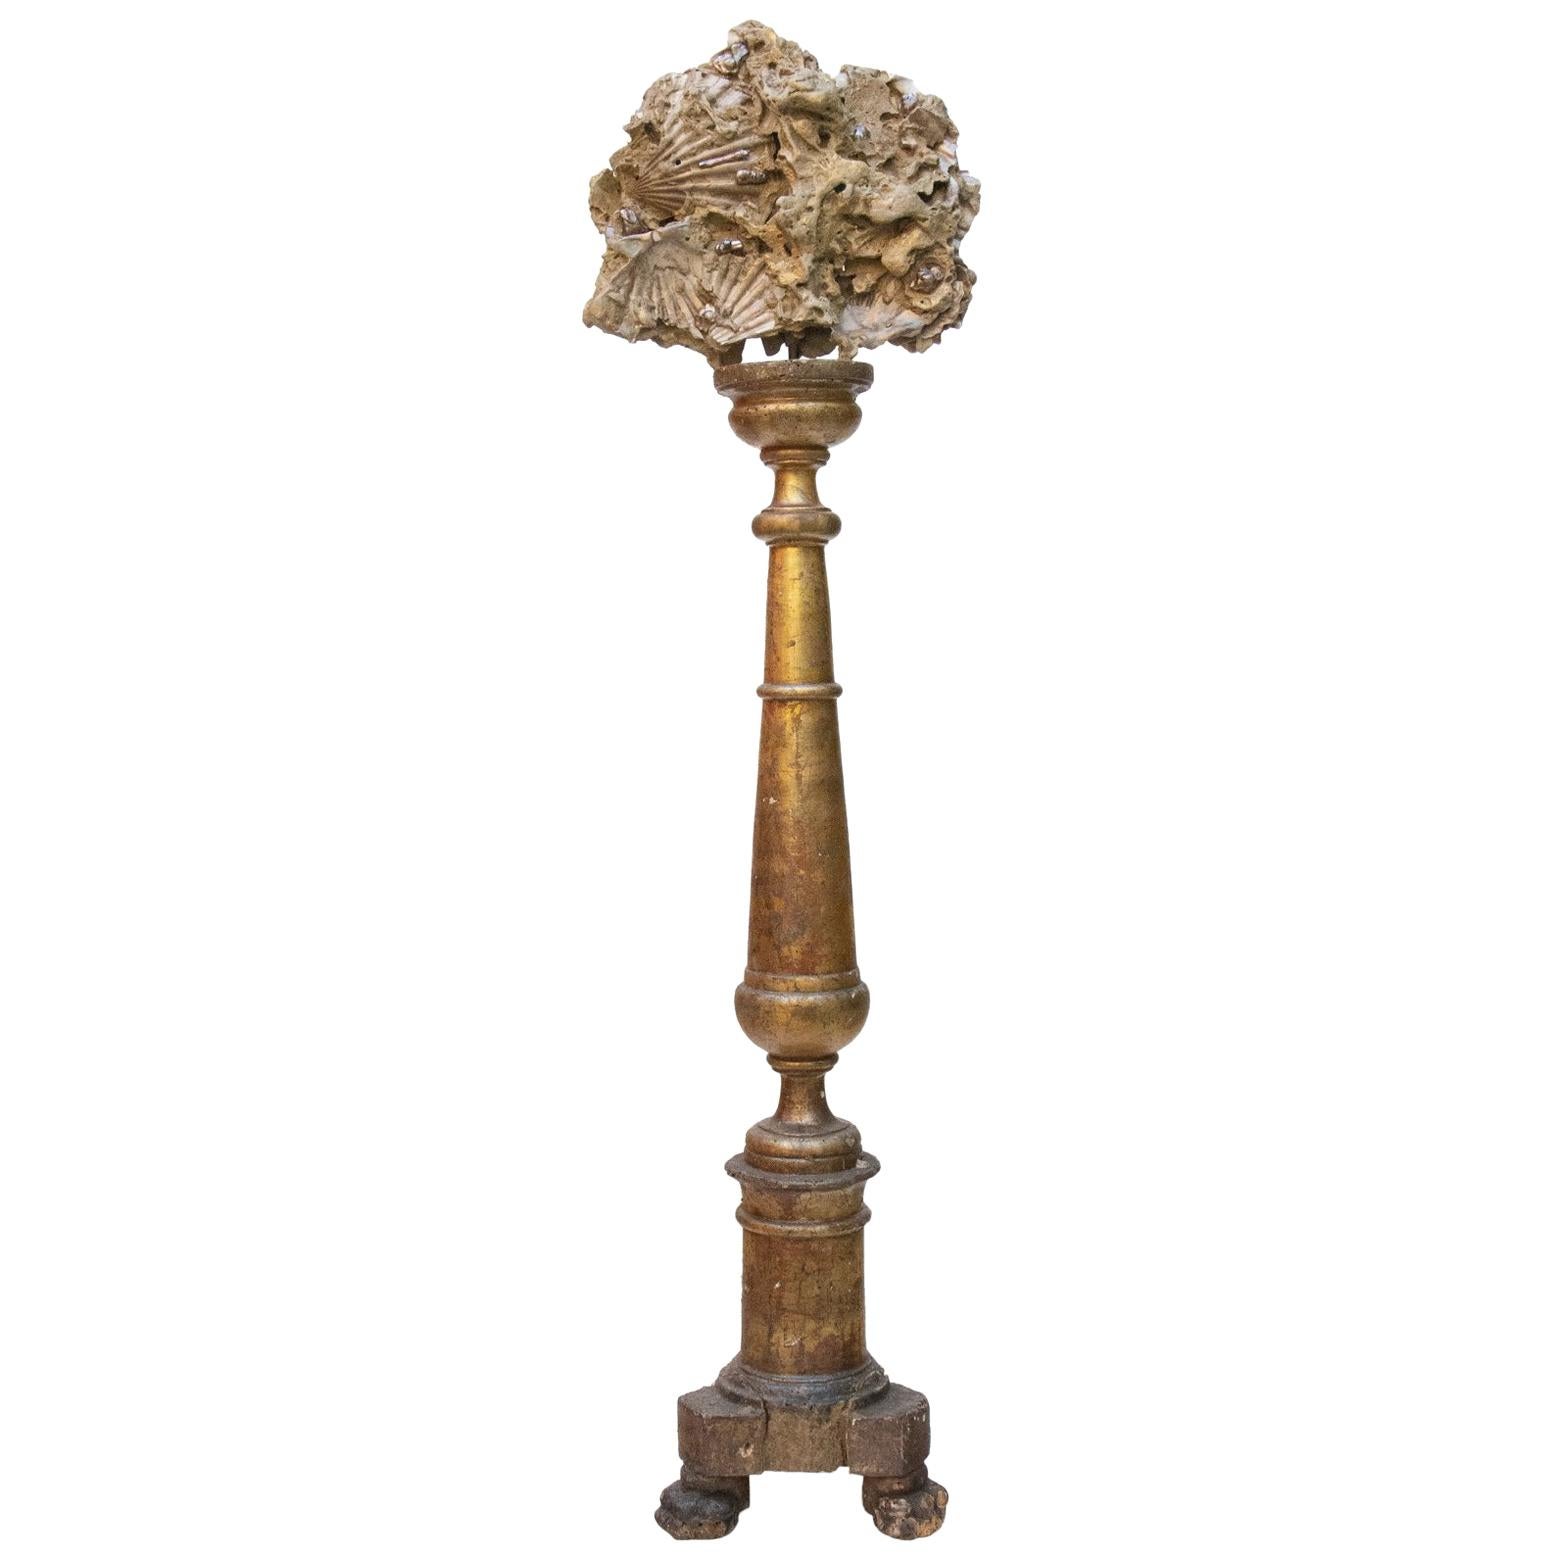 18th Century Italian Altar Stick with a Chesapecten Fossil Shell and Pearls 